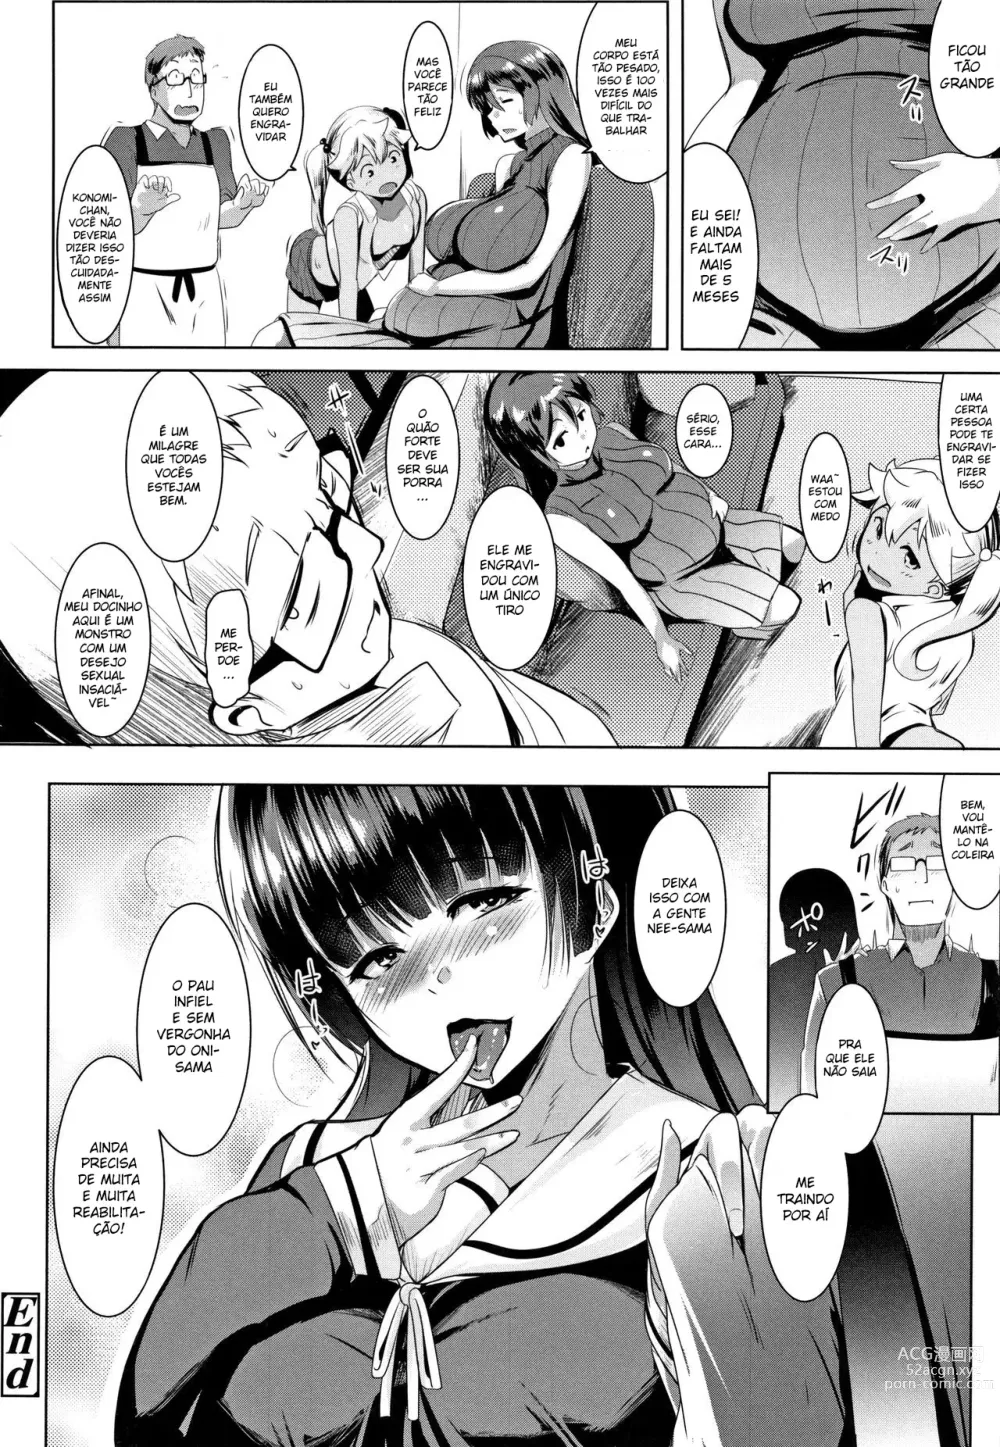 Page 22 of manga Sex-guidance with my precious sister in-law